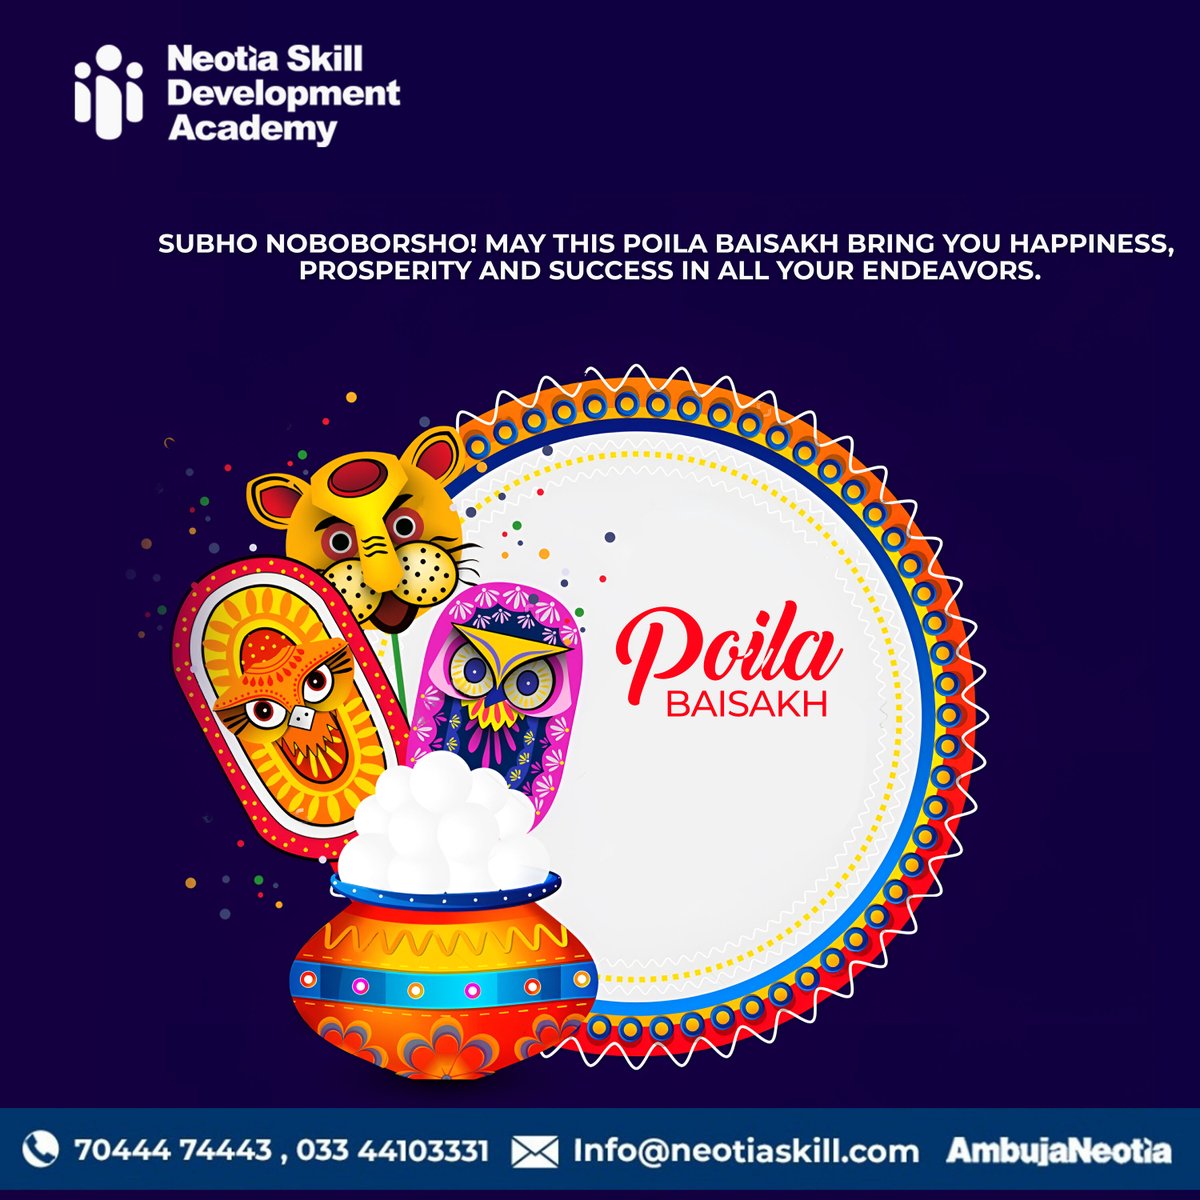 Celebrate Poila Baisakh with new skills at Neotia Skill Development Academy! This Bengali New Year, empower your career journey with our specialized courses. Join us for #NewBeginnings and unlock endless possibilities! #PoilaBaisakh #NSDA2024 #AmbujaNeotia